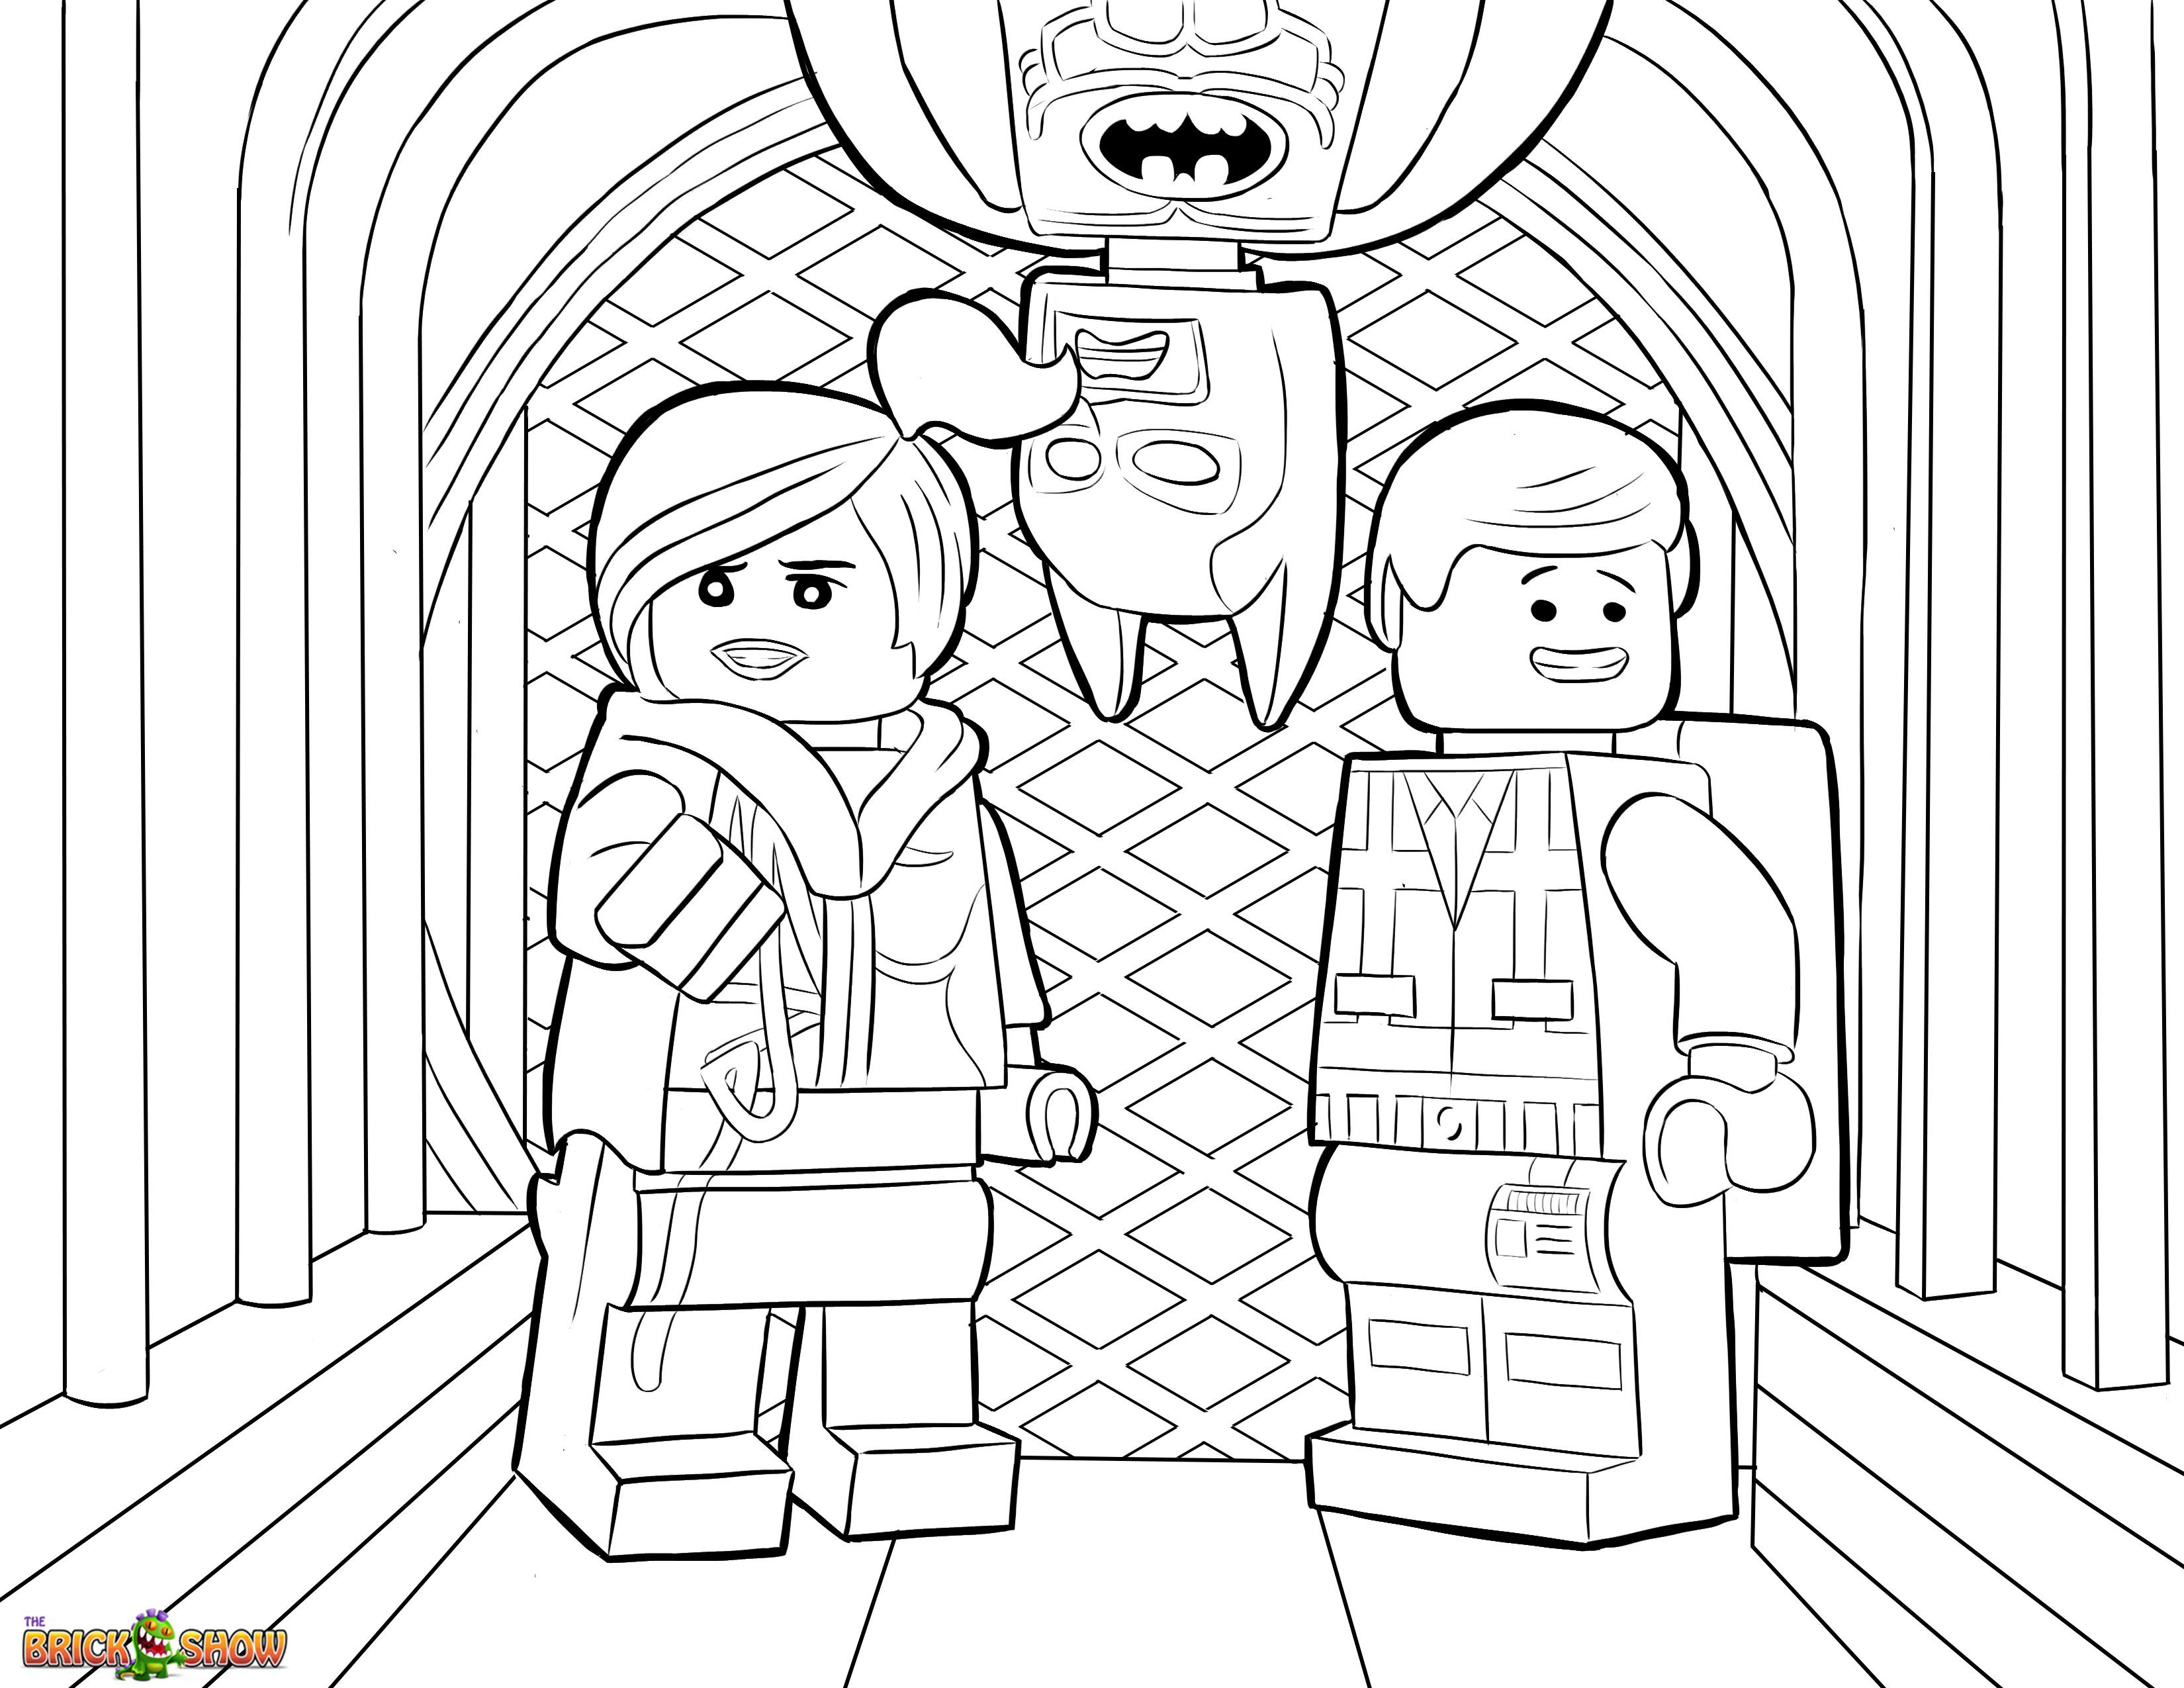 1000+ images about LEGO Movie Coloring Pages on Pinterest